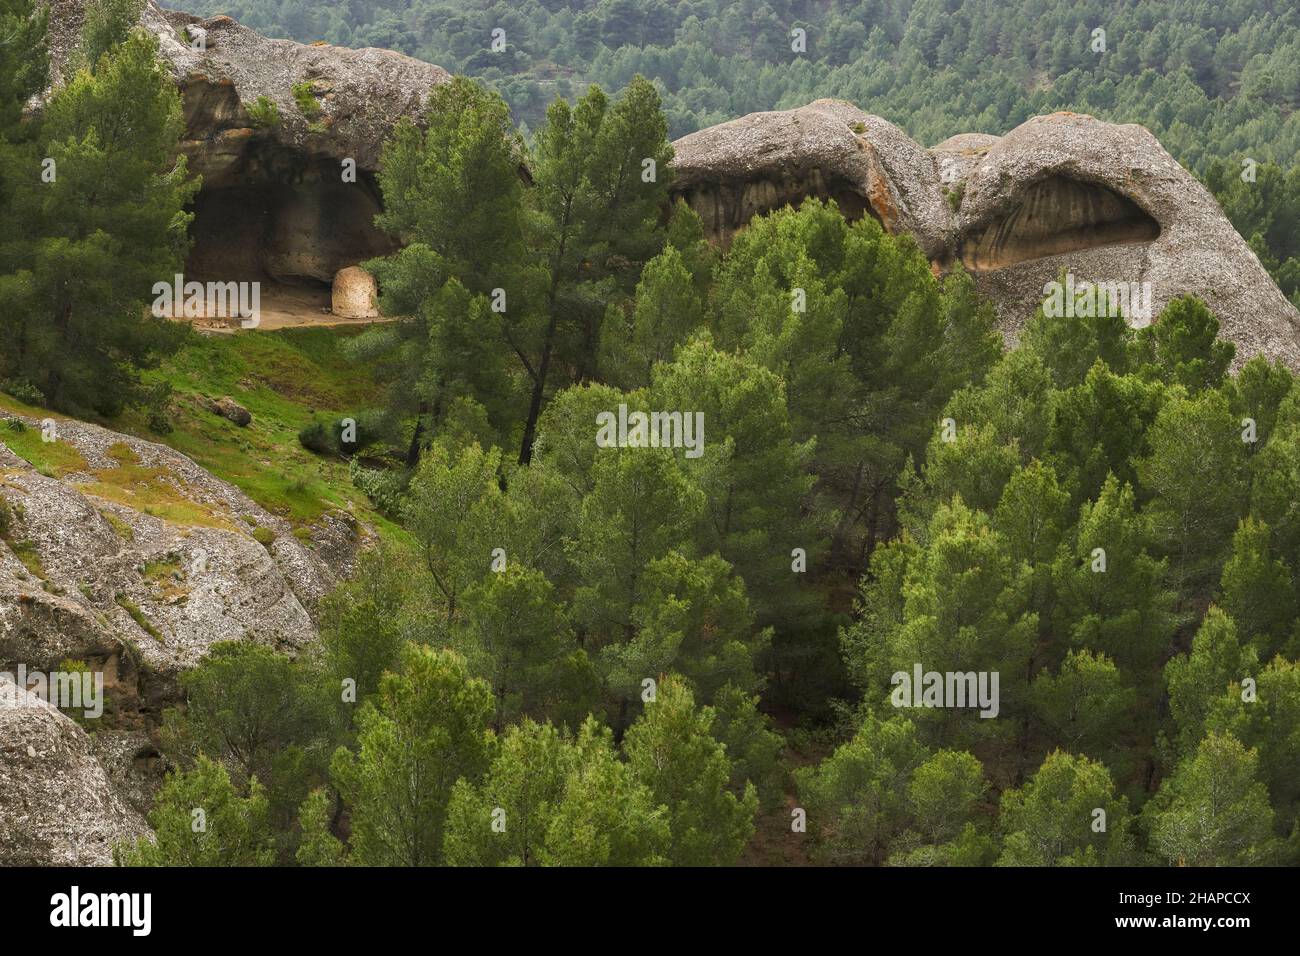 Geological formations of Tafoni (Taffoni) in the sandstone rock in El Chorro, Ardales. Andalusia, Spain Stock Photo